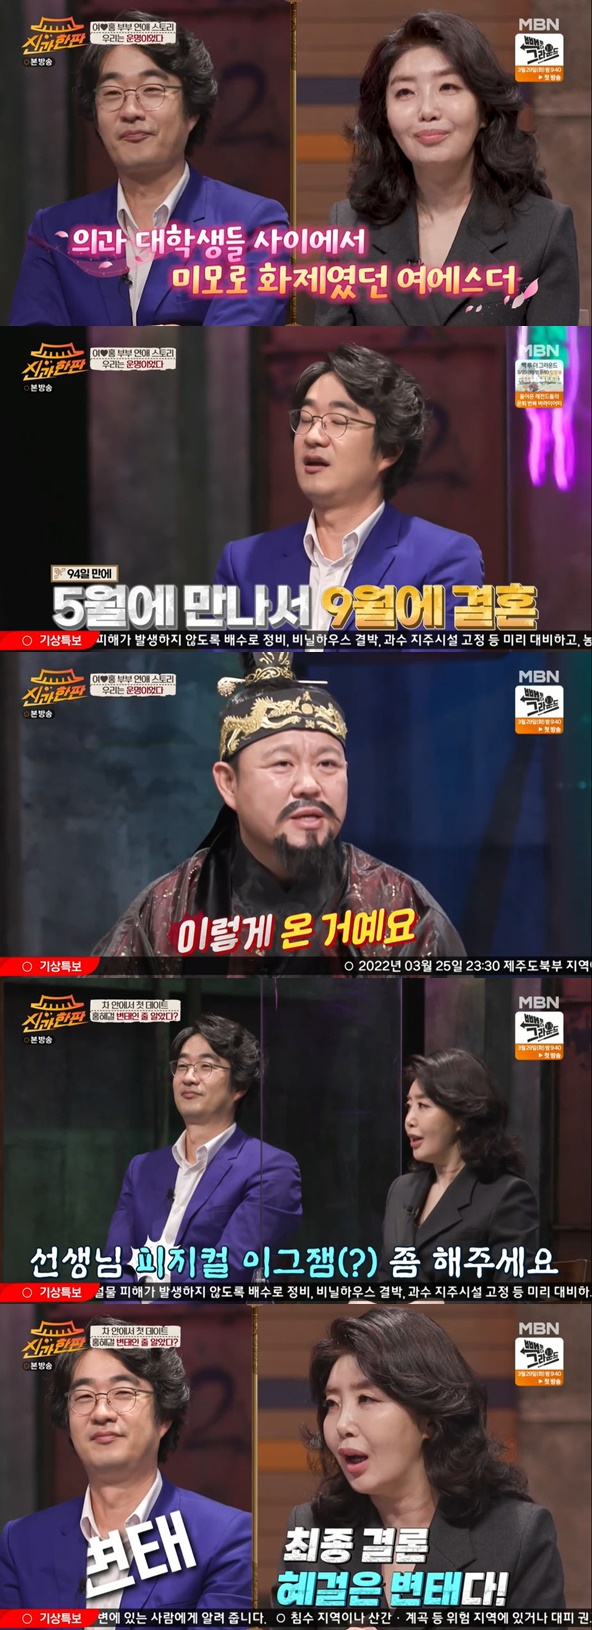 On the 25th MBN entertainment program God and the Blind, the doctor couple Yeo Esther and Hong Hye-geol appeared.It was so much a stick that I had the nickname antiques, said Hong Hye-geol. It was Asa when I hit it now.Yeo Esther, a senior at the school, said, My husband has never made a woman in college. I could not drink tea to my first favorite junior and I was tea.My wife had a boyfriend at the time, Hong Hye-geol said, adding that she was a CC (in-school couple).I heard that my wife was good at body, he recalled.Hong Hye-geol and Yeo Esther were reunited at a seminar after graduation.Hong Hye-geol said, I was looking at the back of the way I saw the Yeo Esther to the subway station and was looking away. It was the first feeling I felt.I met in May and married in September, said Gim Gu-ra, I met and married briefly, so I came here.Yeo Esther revealed her love story with Hong Hye-geol, who recalled her first date and said she was so weird thinking now and laughed.I was in the car, he said. My husband said, Teacher, please check it out. He lifted his shirt.Yeo Esther then recalled the moment she was proposed to Hong Hye-geol.My husband walked in the hotel garden and grabbed his hand and said, Lets get married. I did not have time to marry an old woman at the time.My husband held me a little, but he exhaled. I thought later, I wanted to be a pervert. Yeo Esther was 30 years old.I thought she was an old maid when she was 30.Hong Hye-geol emphasized that he had done so with pure intention, saying, I thought I was acquainted with some, and I was actually not good.I have to listen to the answer (Yeo Esthers) and Im just doing it because I put up my clothes, said Gim Gu-ra, who summarized the situation, saying, Mr. Hye-gul is a mugwort and simple.Hong Hye-geol said, I had a reason why my social life was not good. I have seen buds since then. There was a lot of playfulness.Photo = MBN broadcast screen